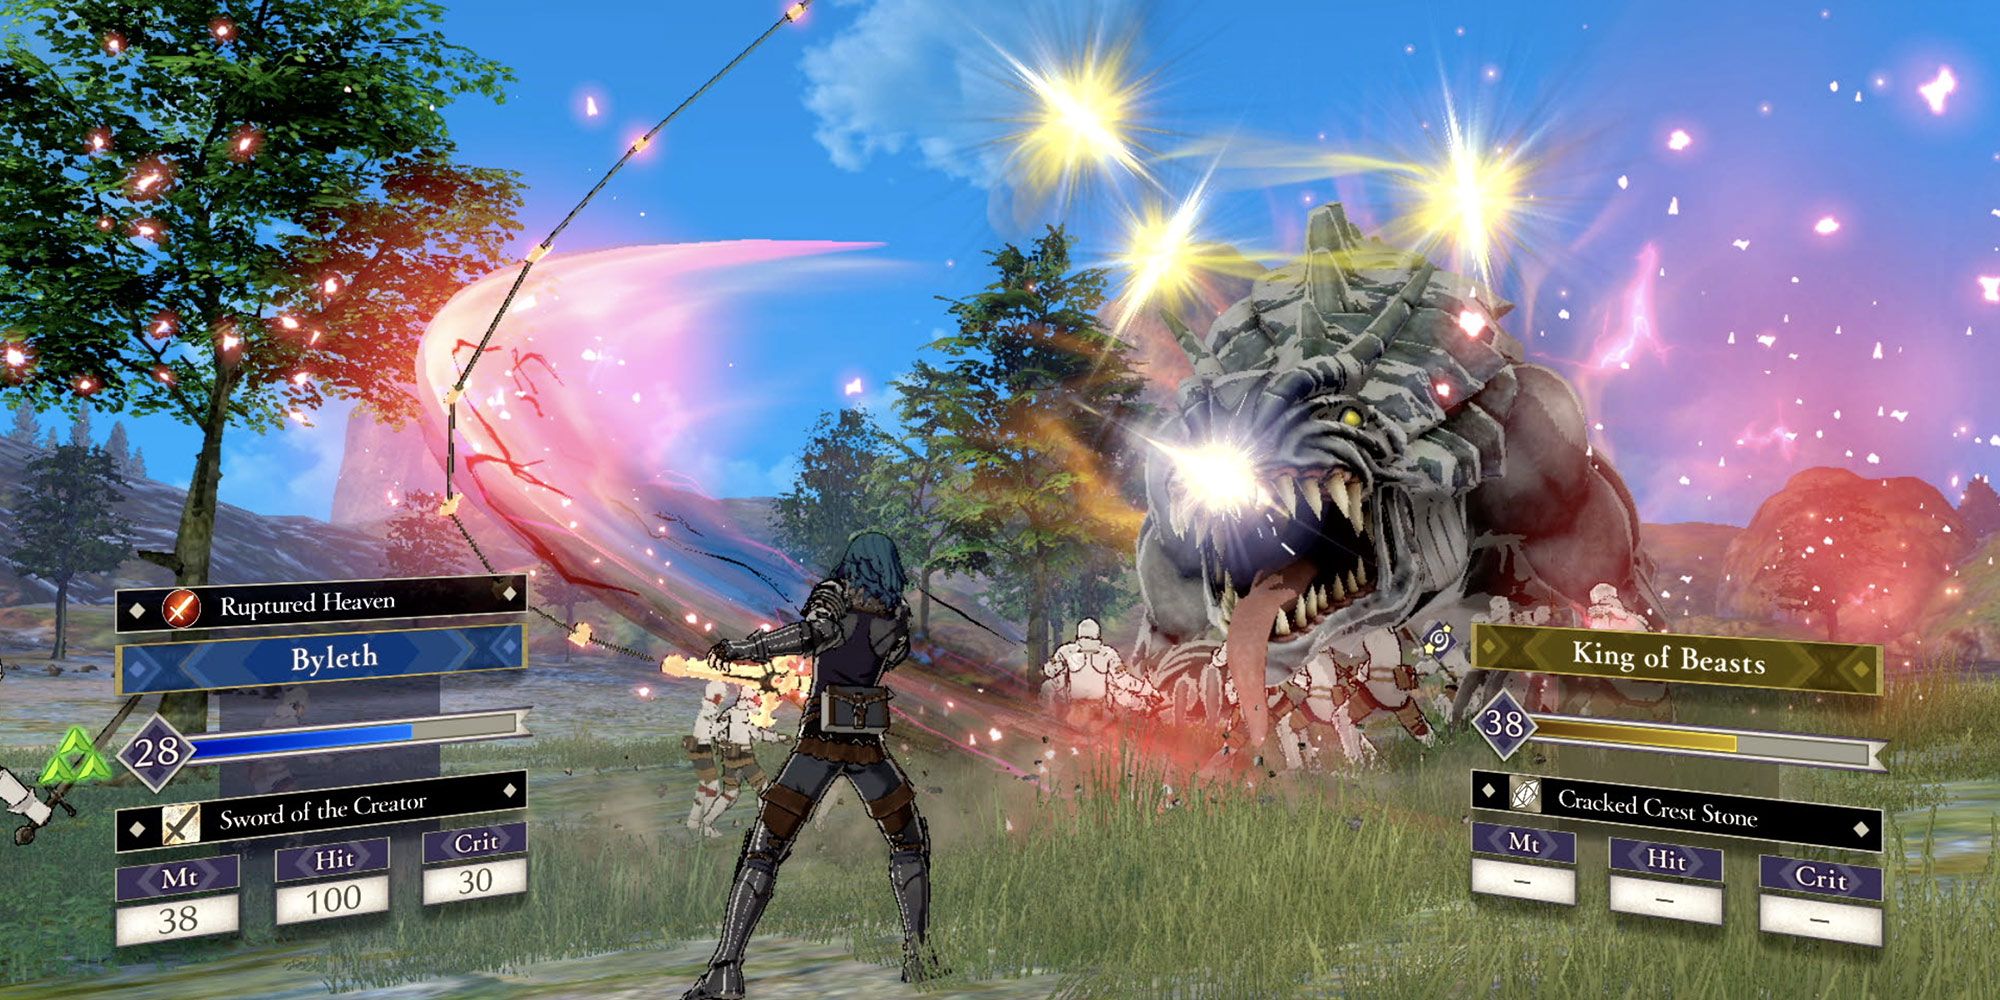 A screenshot showing gameplay in Fire Emblem: Three Houses